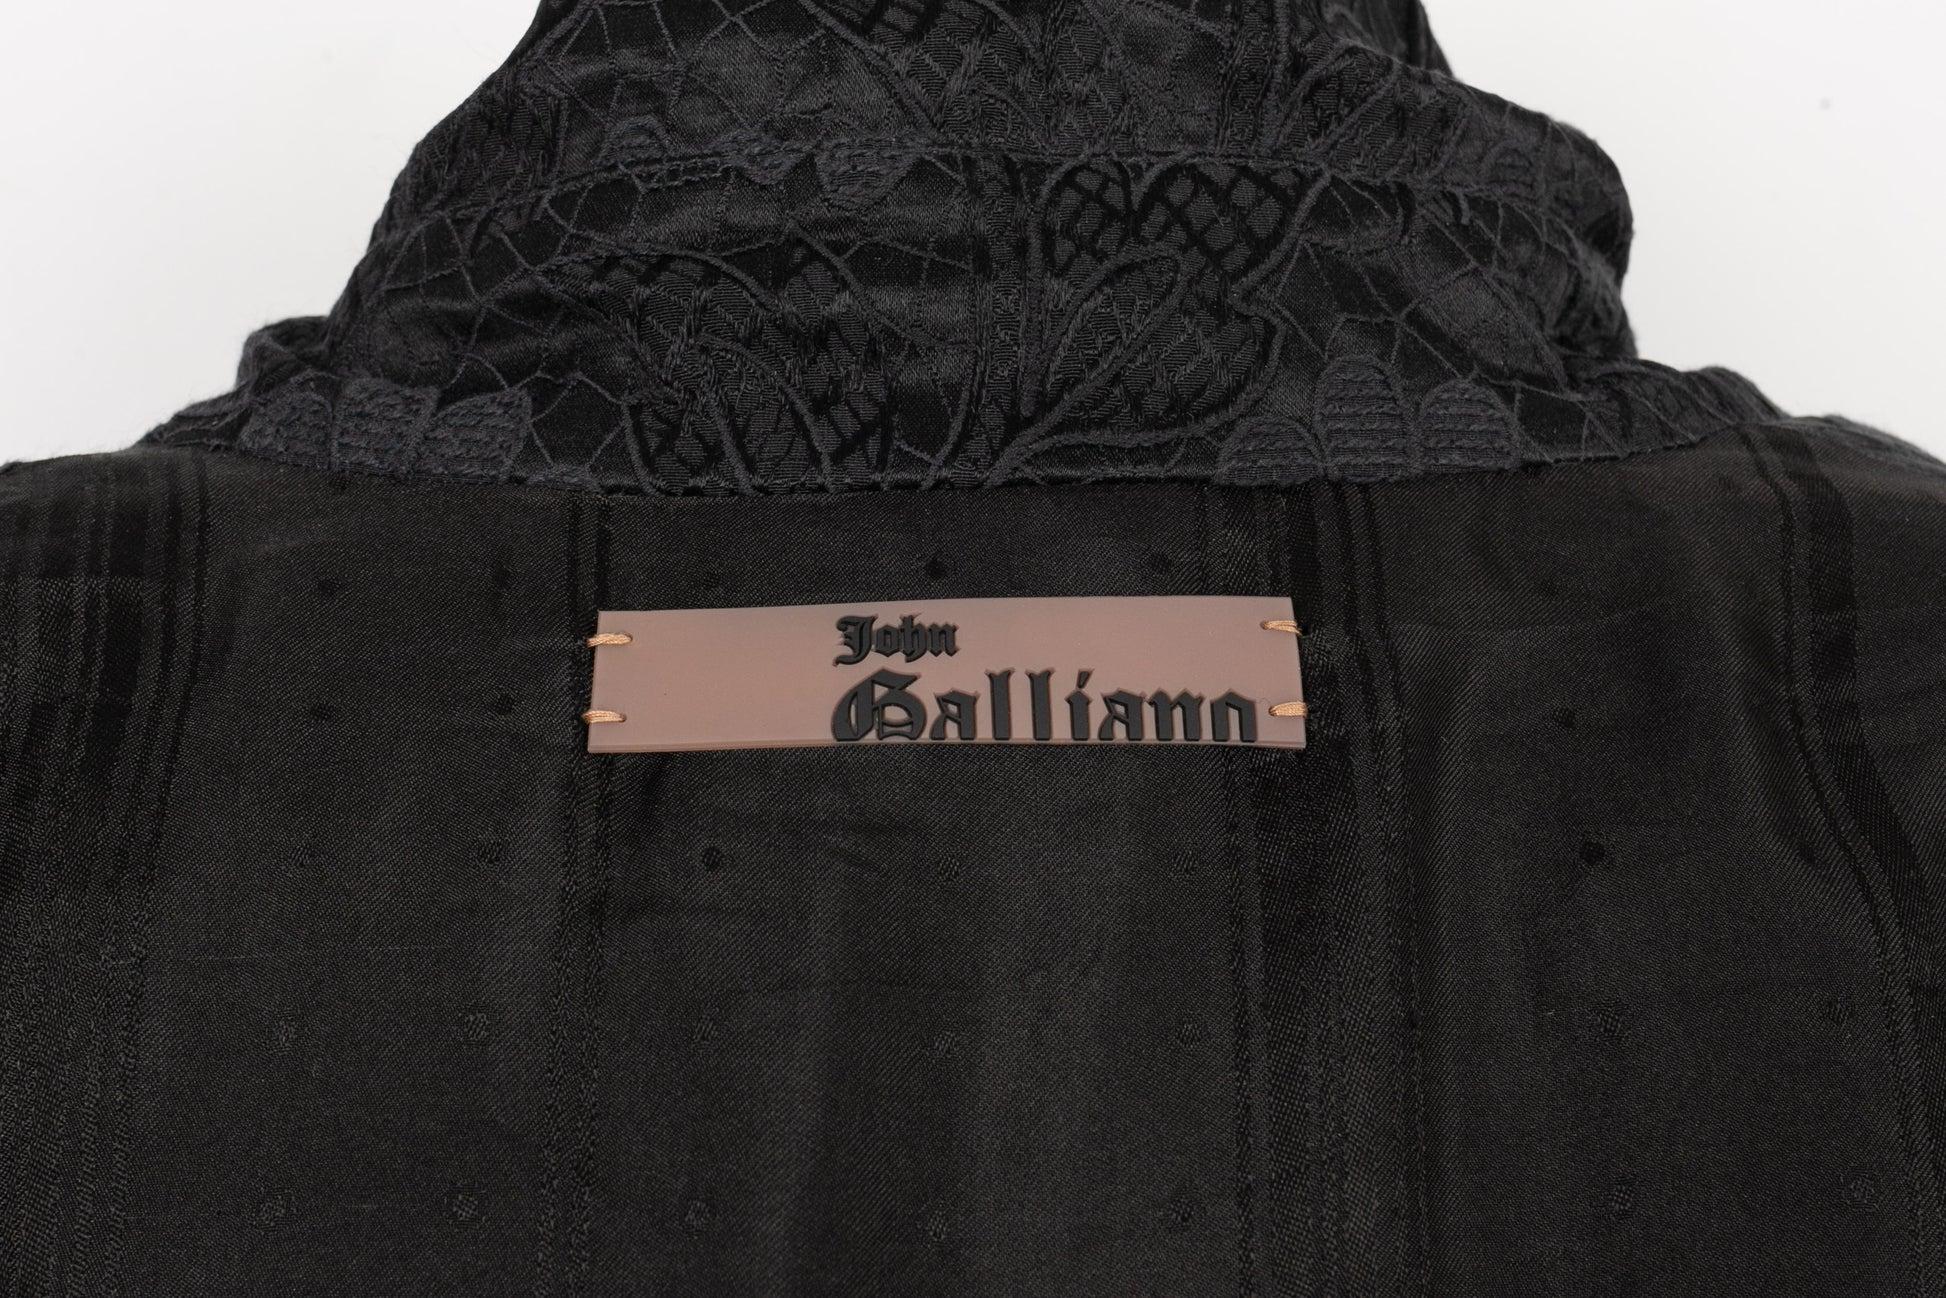 Galliano Black Cotton Trench-style Coat Illustrated with Flowers For Sale 4